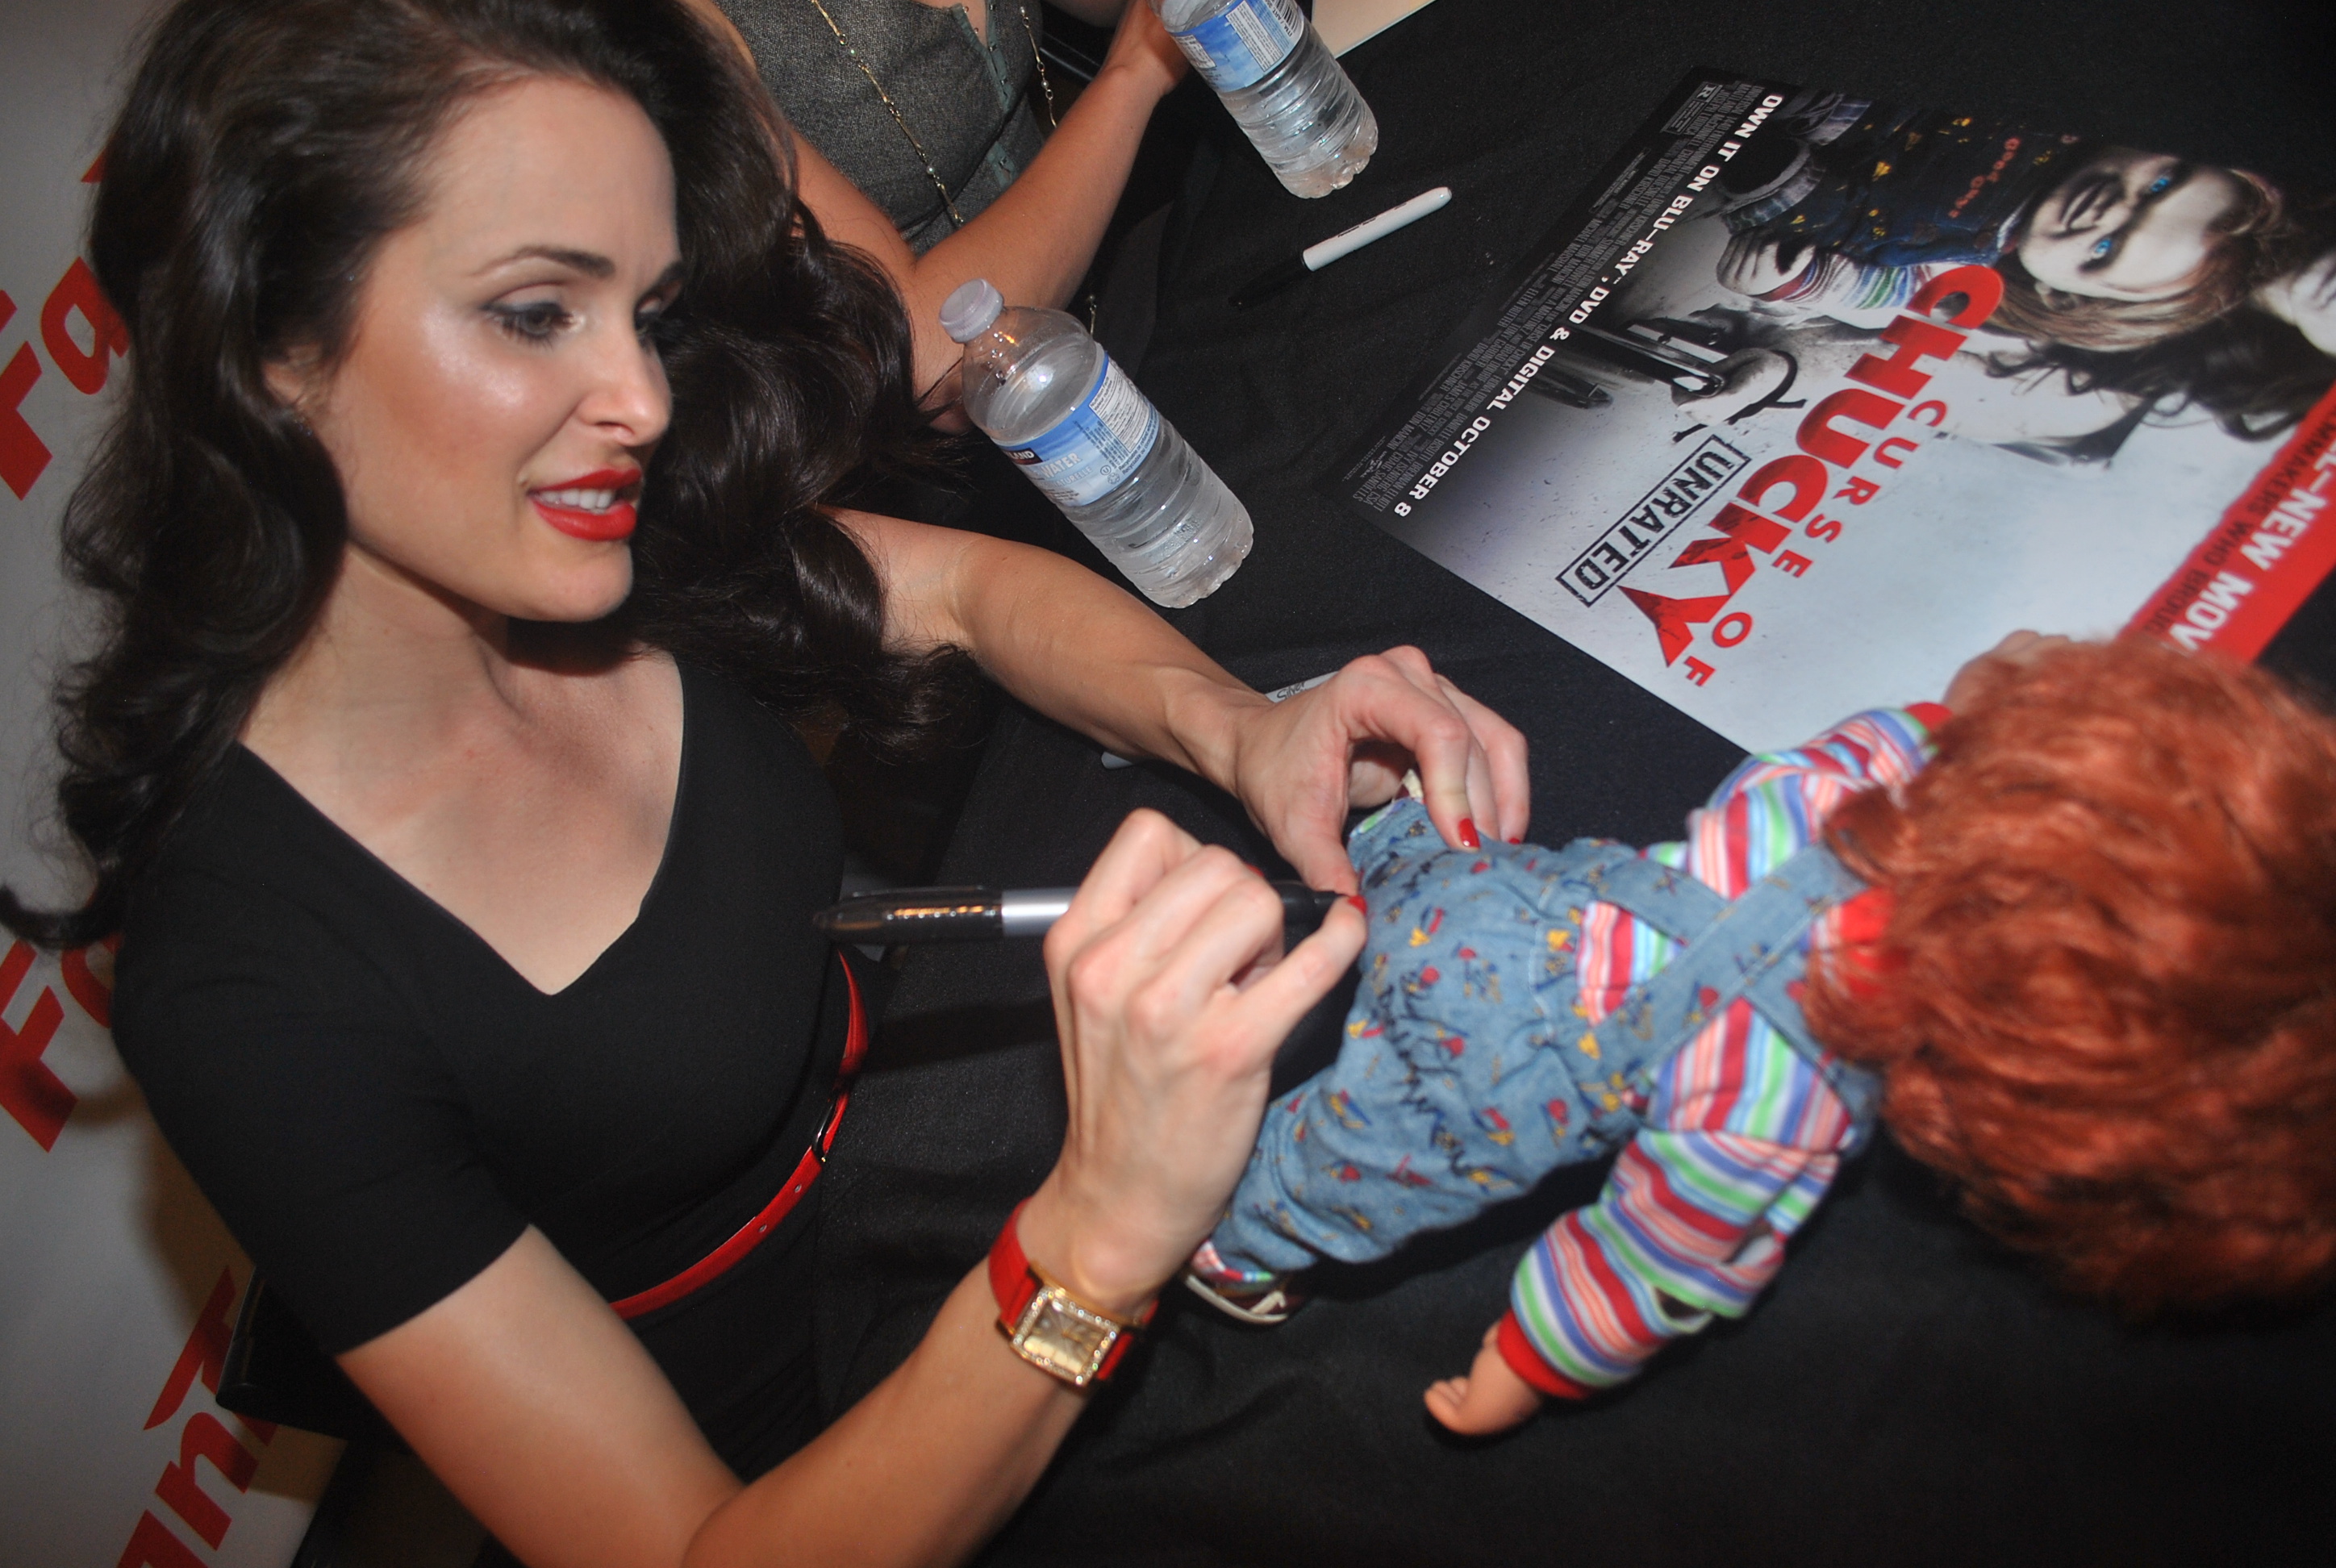 Danielle Bisutti signing a fan's Chucky doll at the 2013 Fantasia Film Festival in Montreal